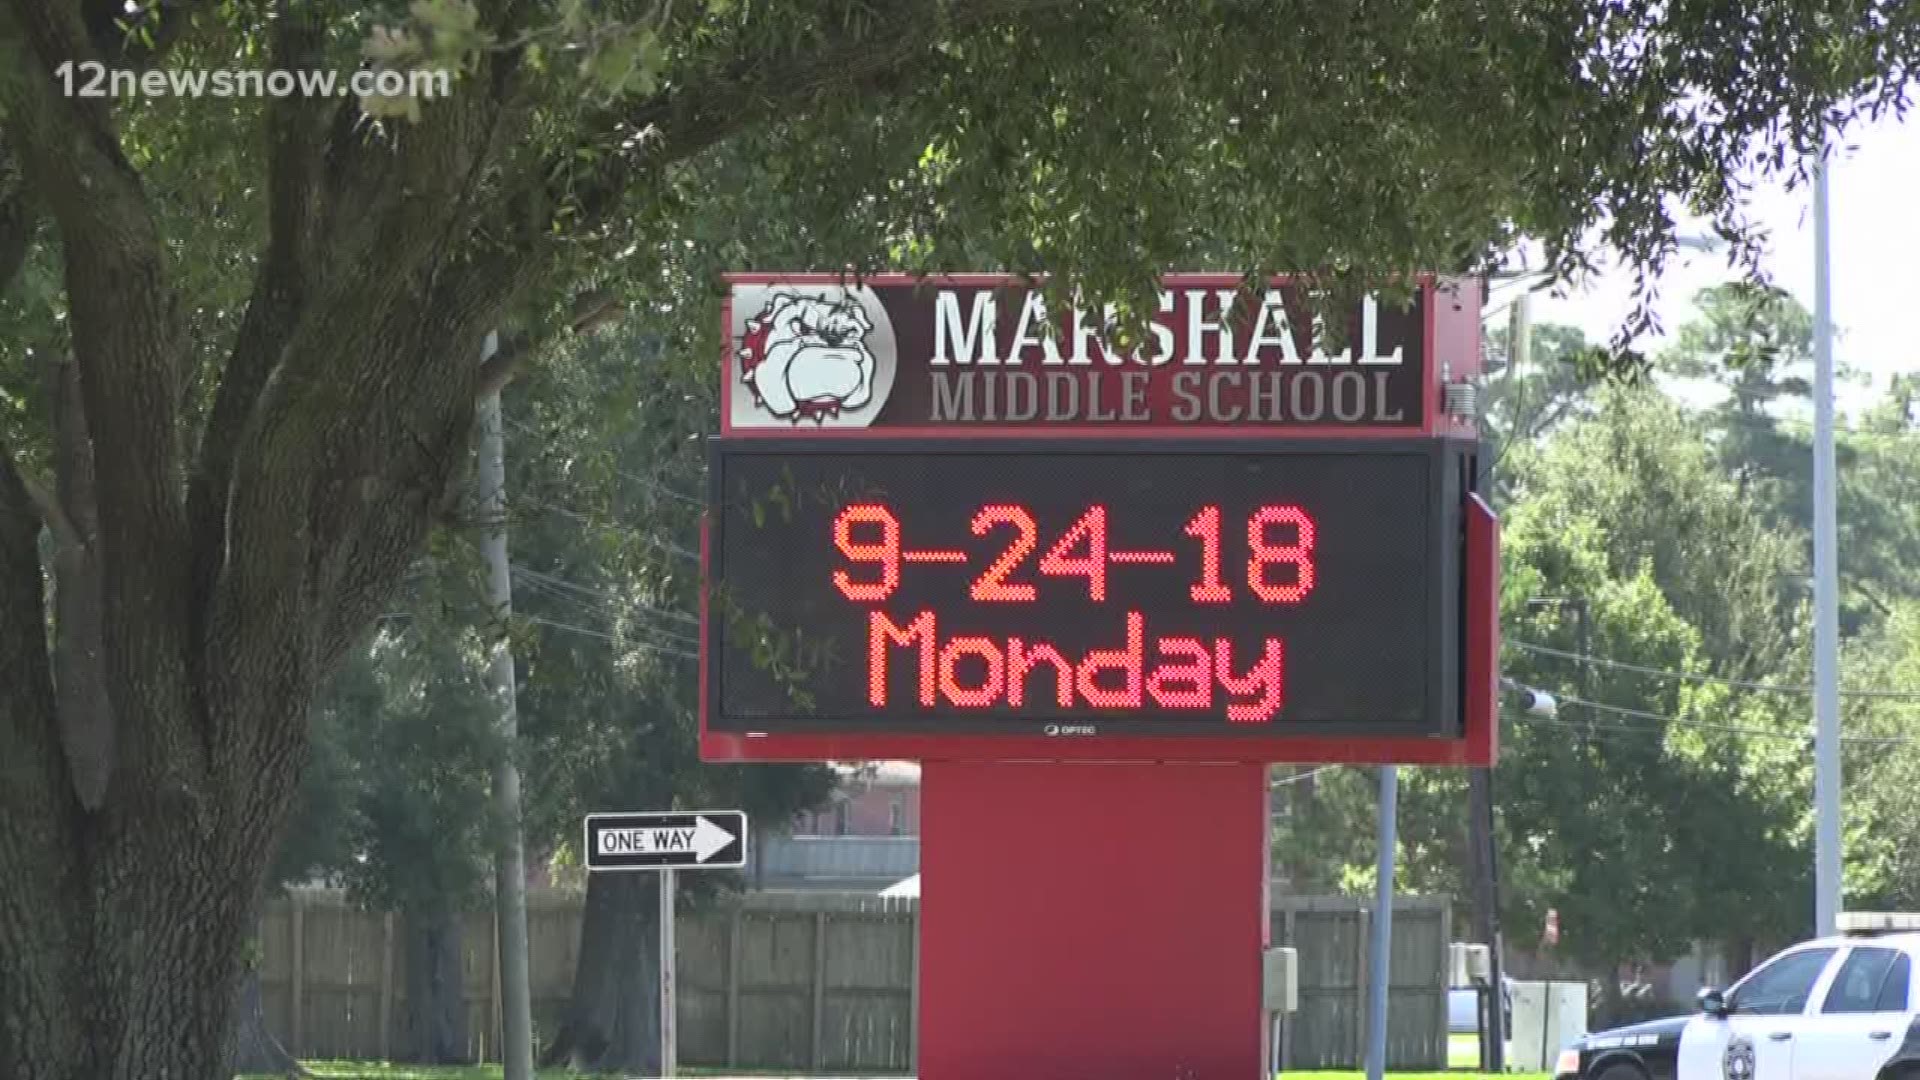 The district is debunking the rumor of an active shooter at the Marshall Middle School dance on Friday.